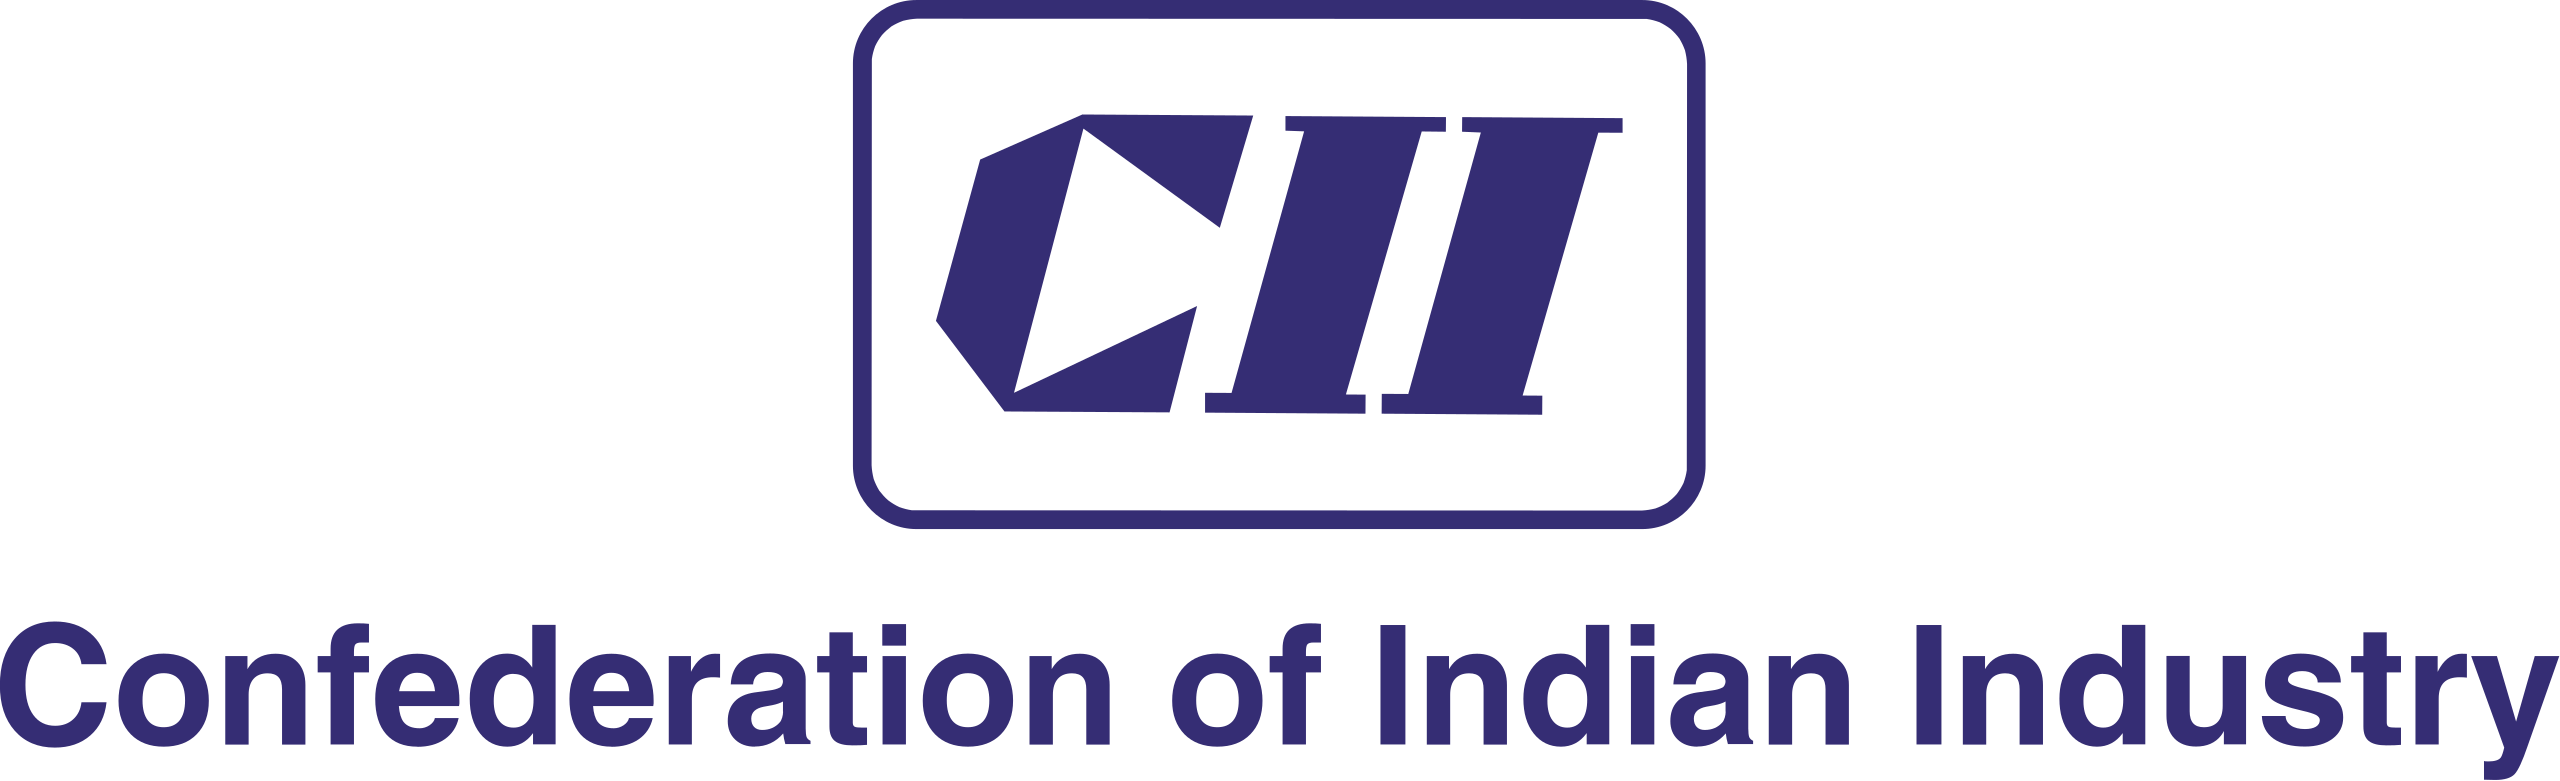 Official_logo_of_the_Confederation_of_Indian_Industry_(CII).svg_